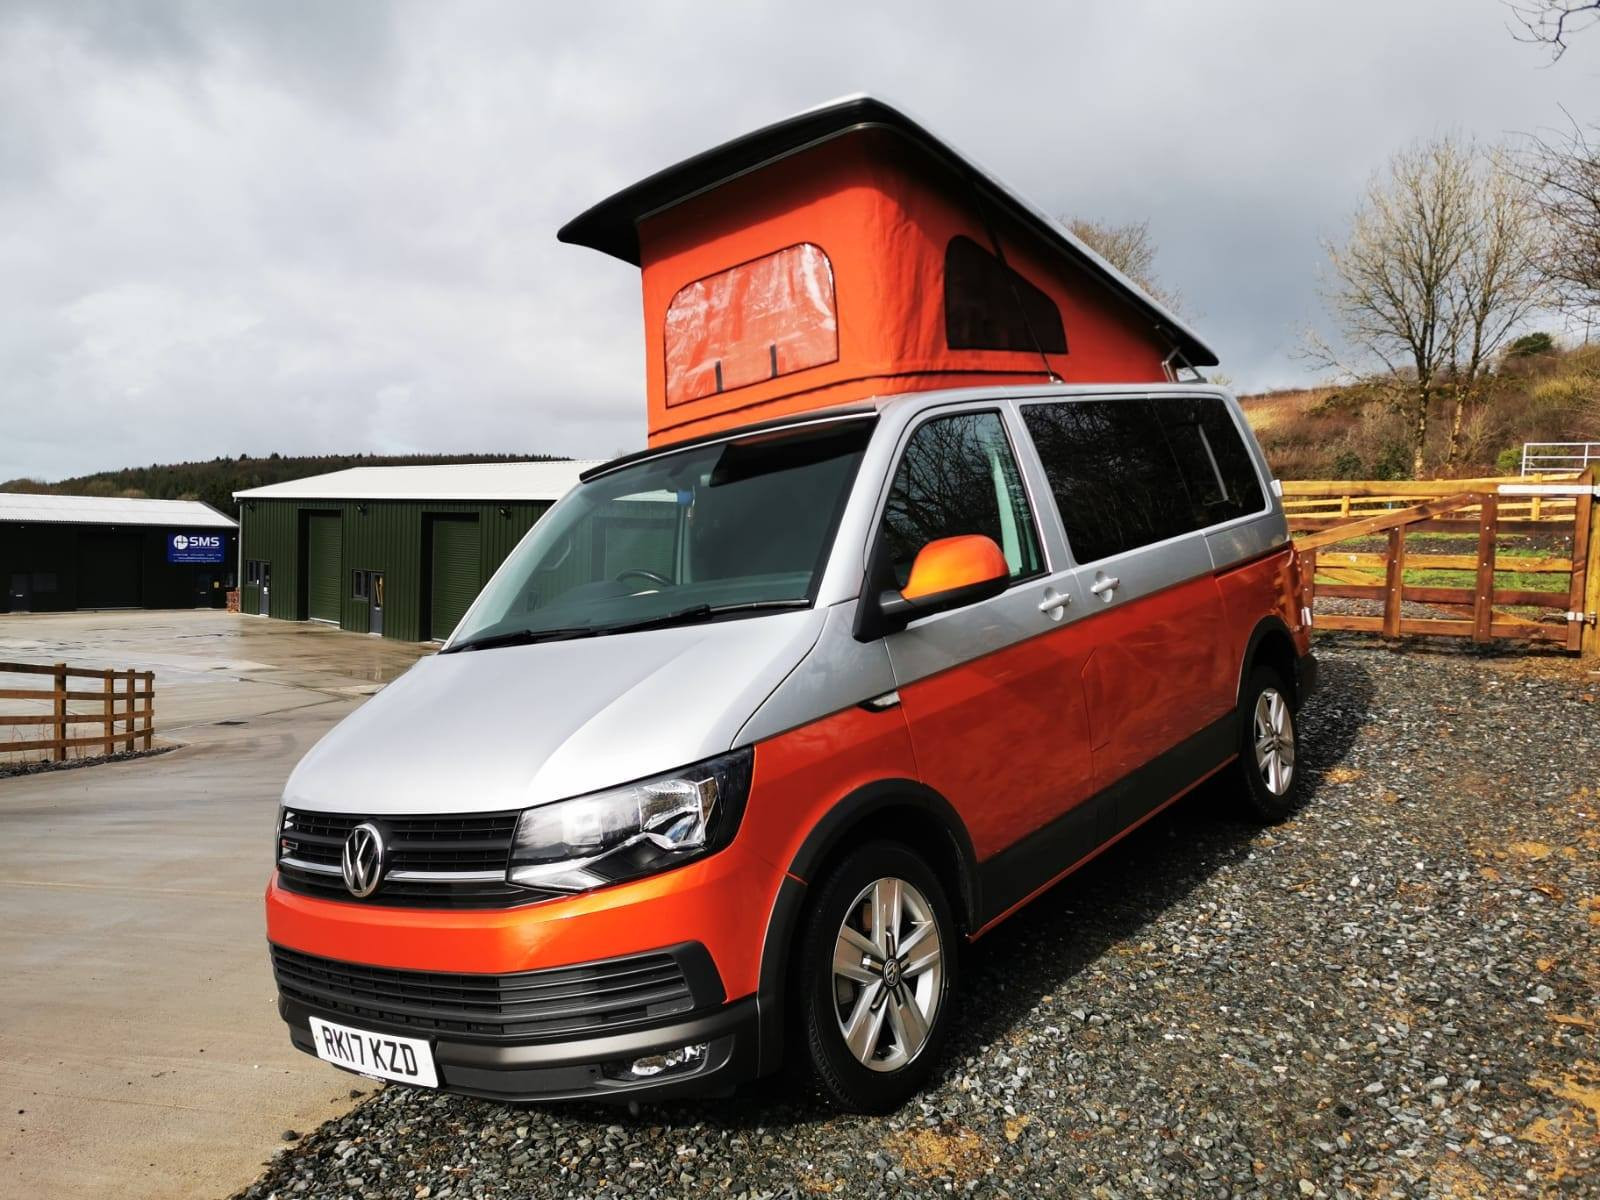 VW T5 vs VW T6: What's the best VW Transporter for a Camper